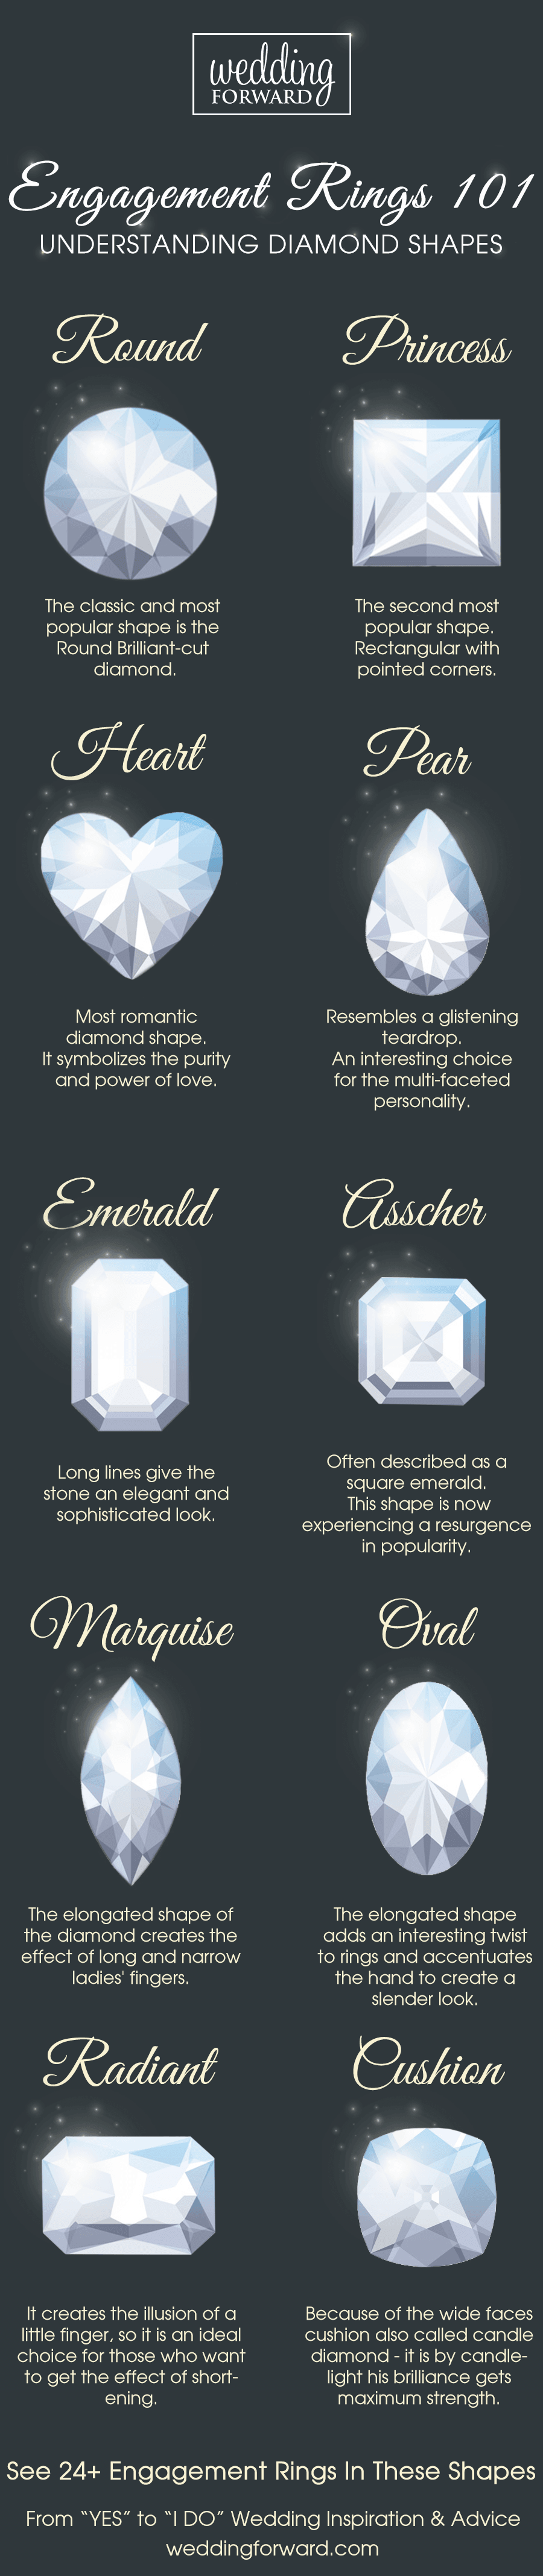 engagement ring shapes infographic